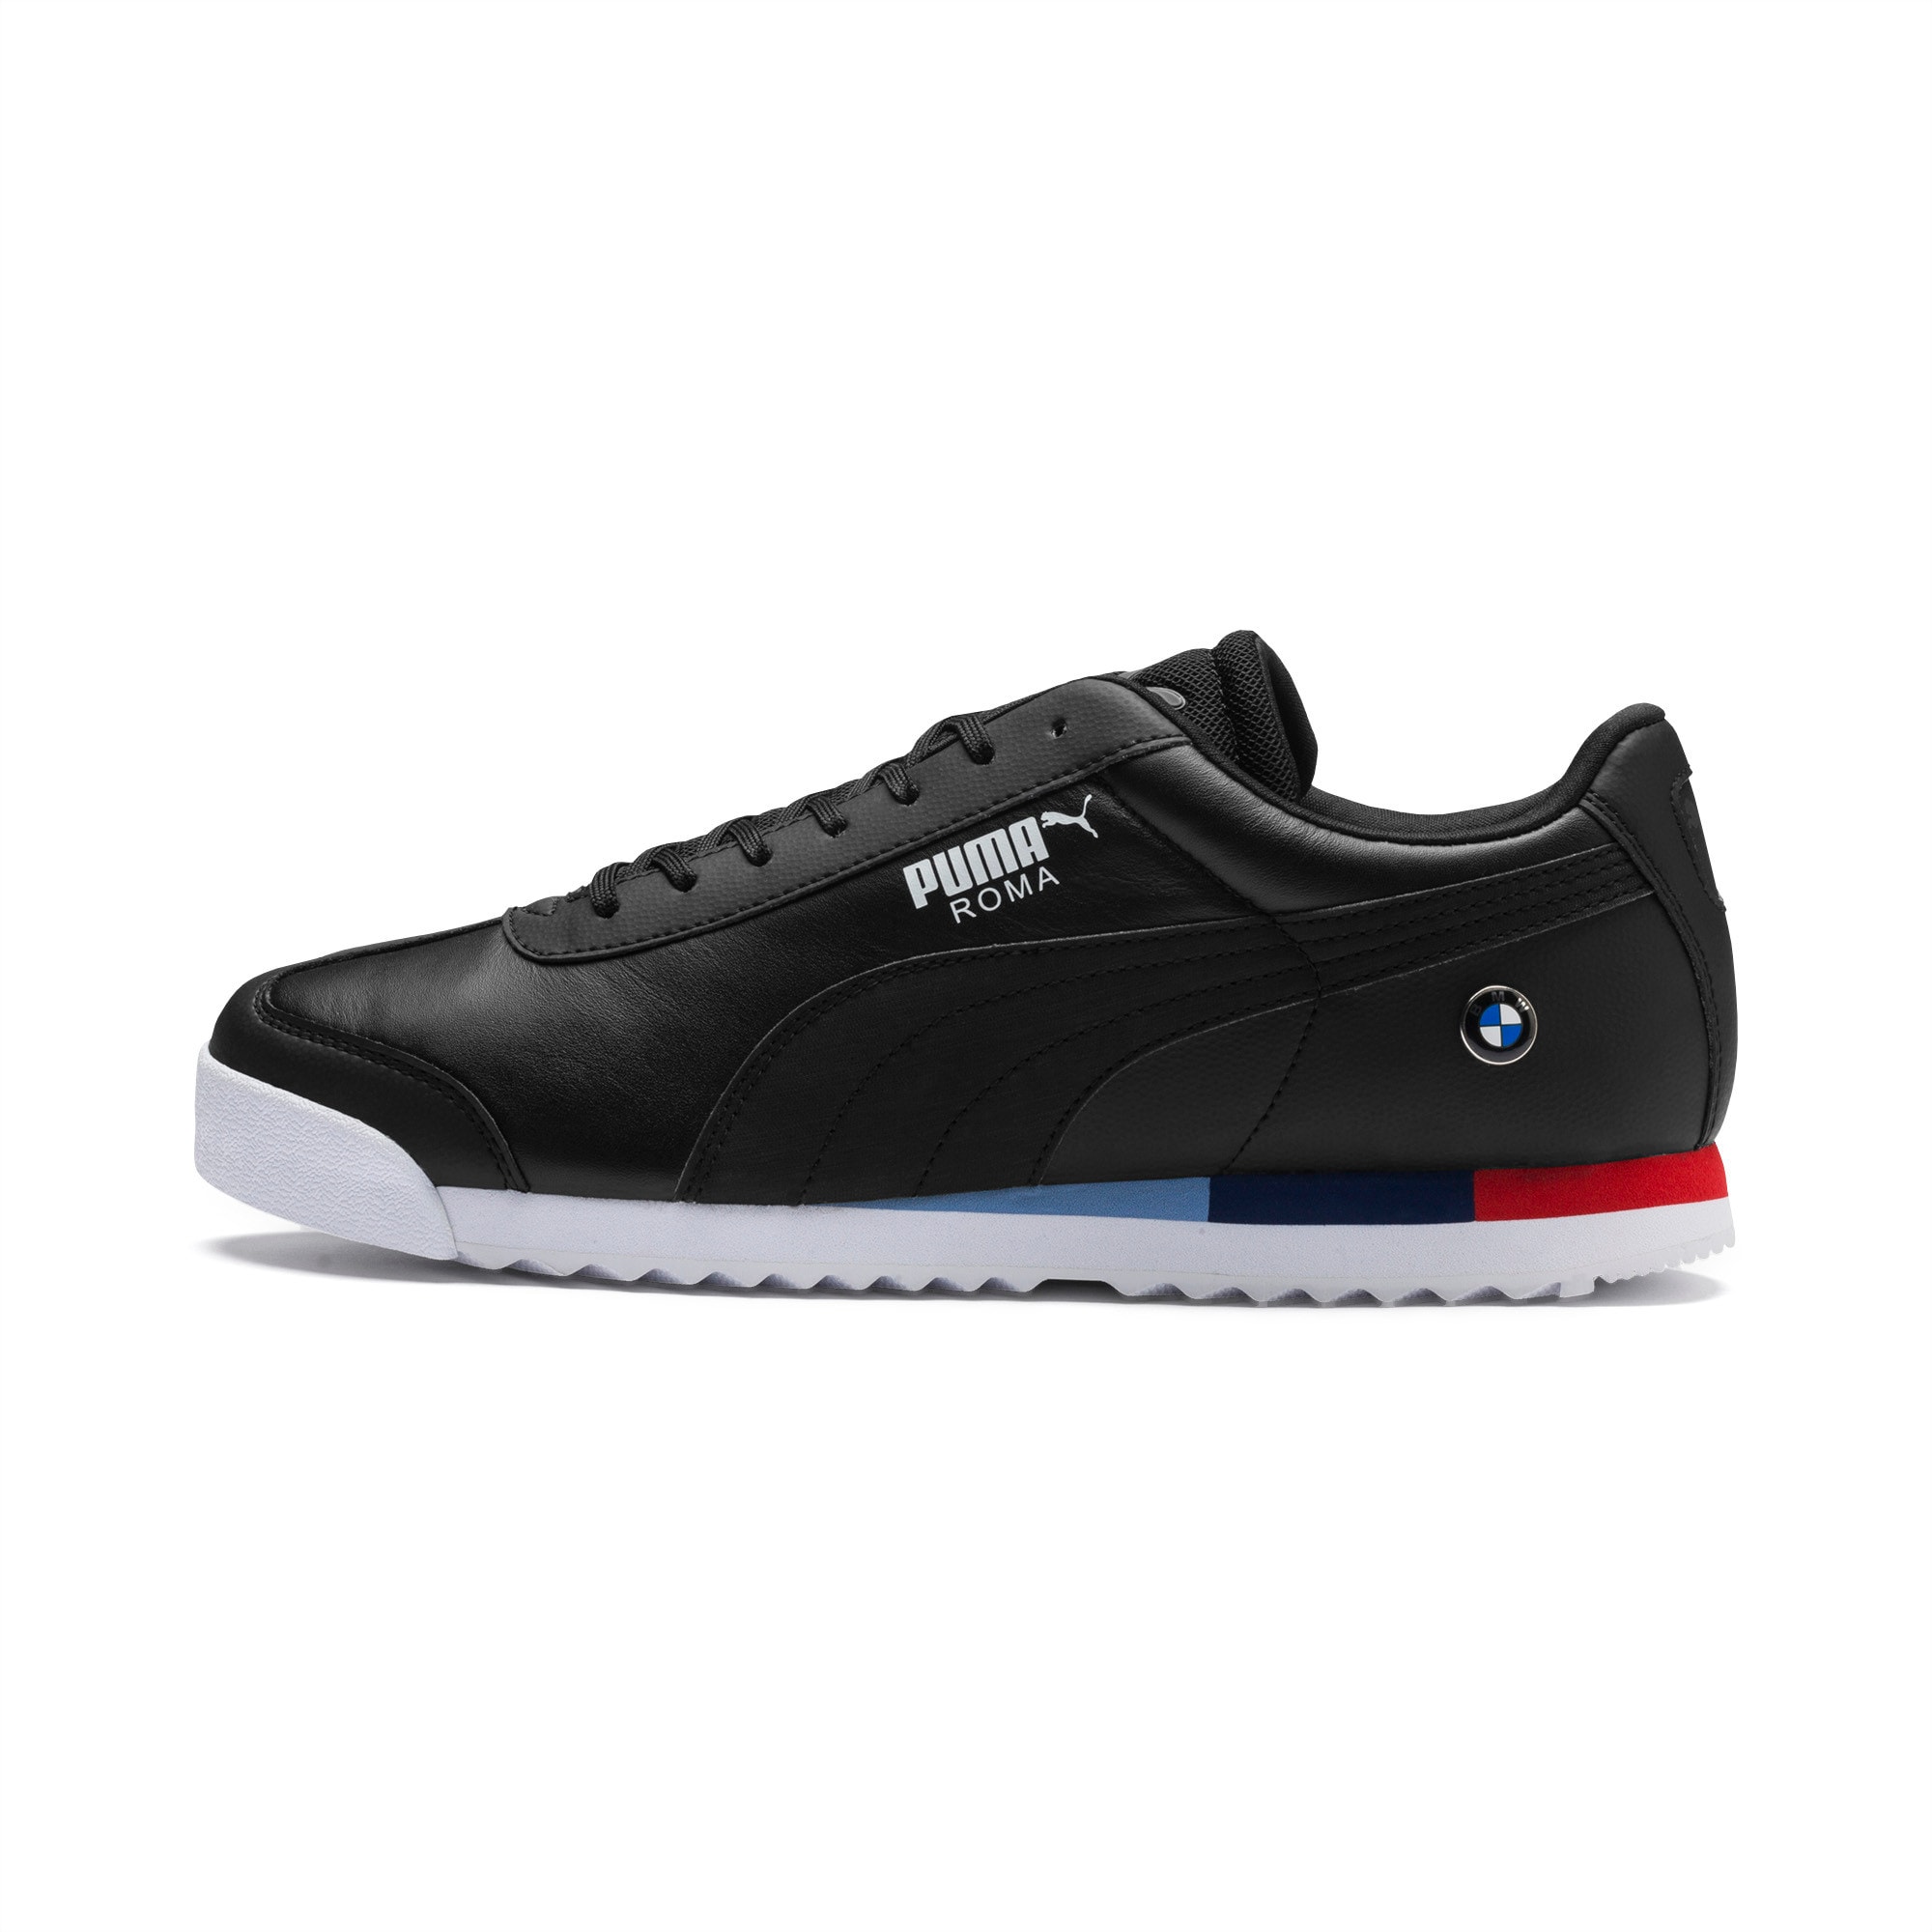 puma shoes online store india